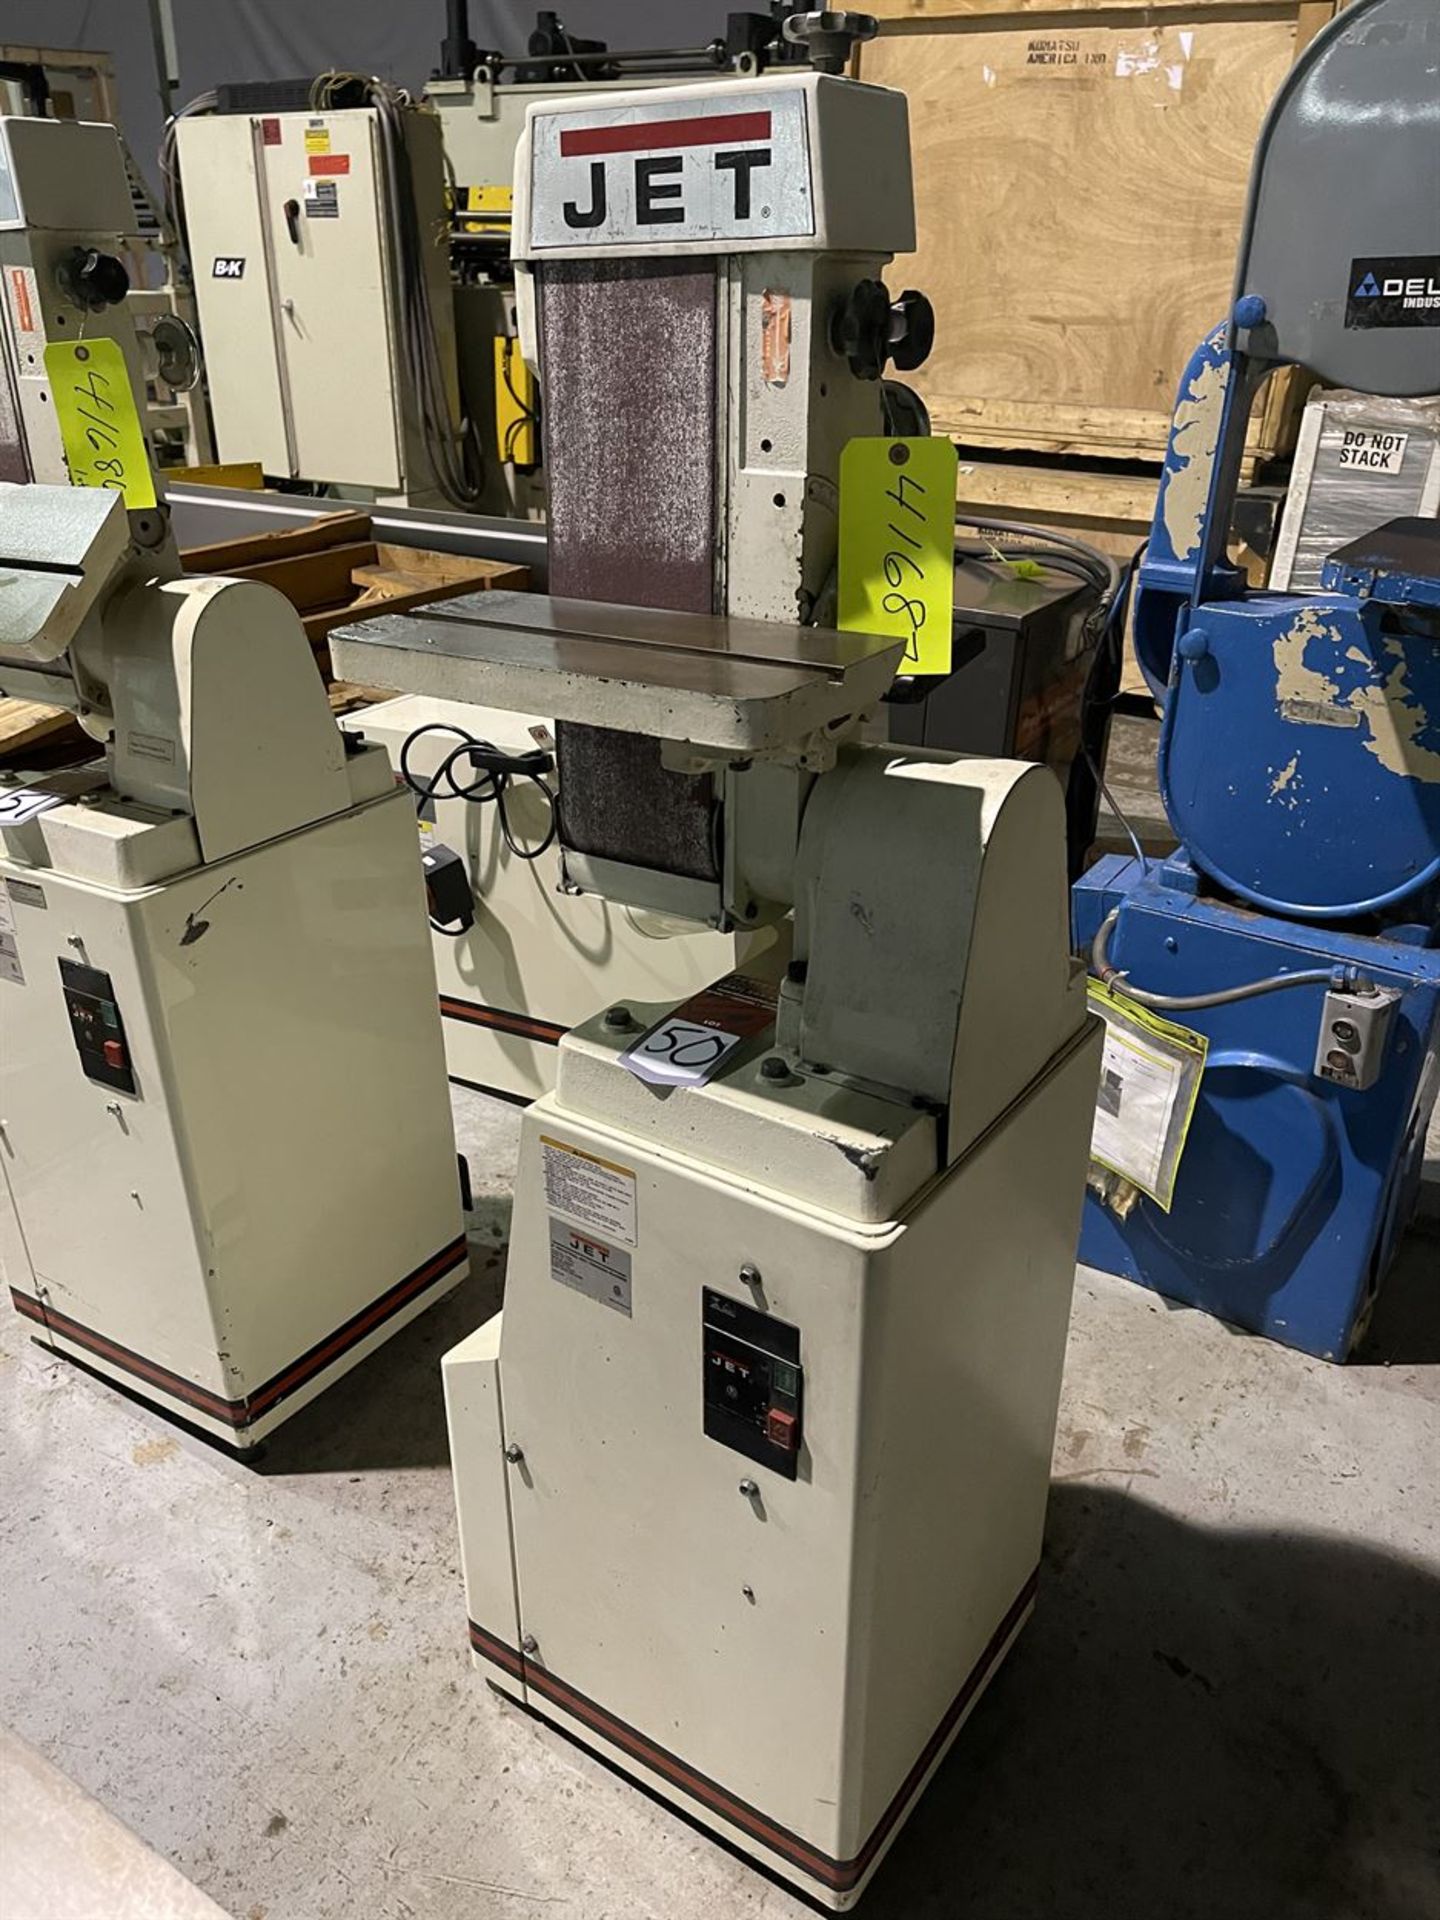 JET J-4301A 6" Belt Finishing Machine (Note: This item was not owned or related to the Pamarco